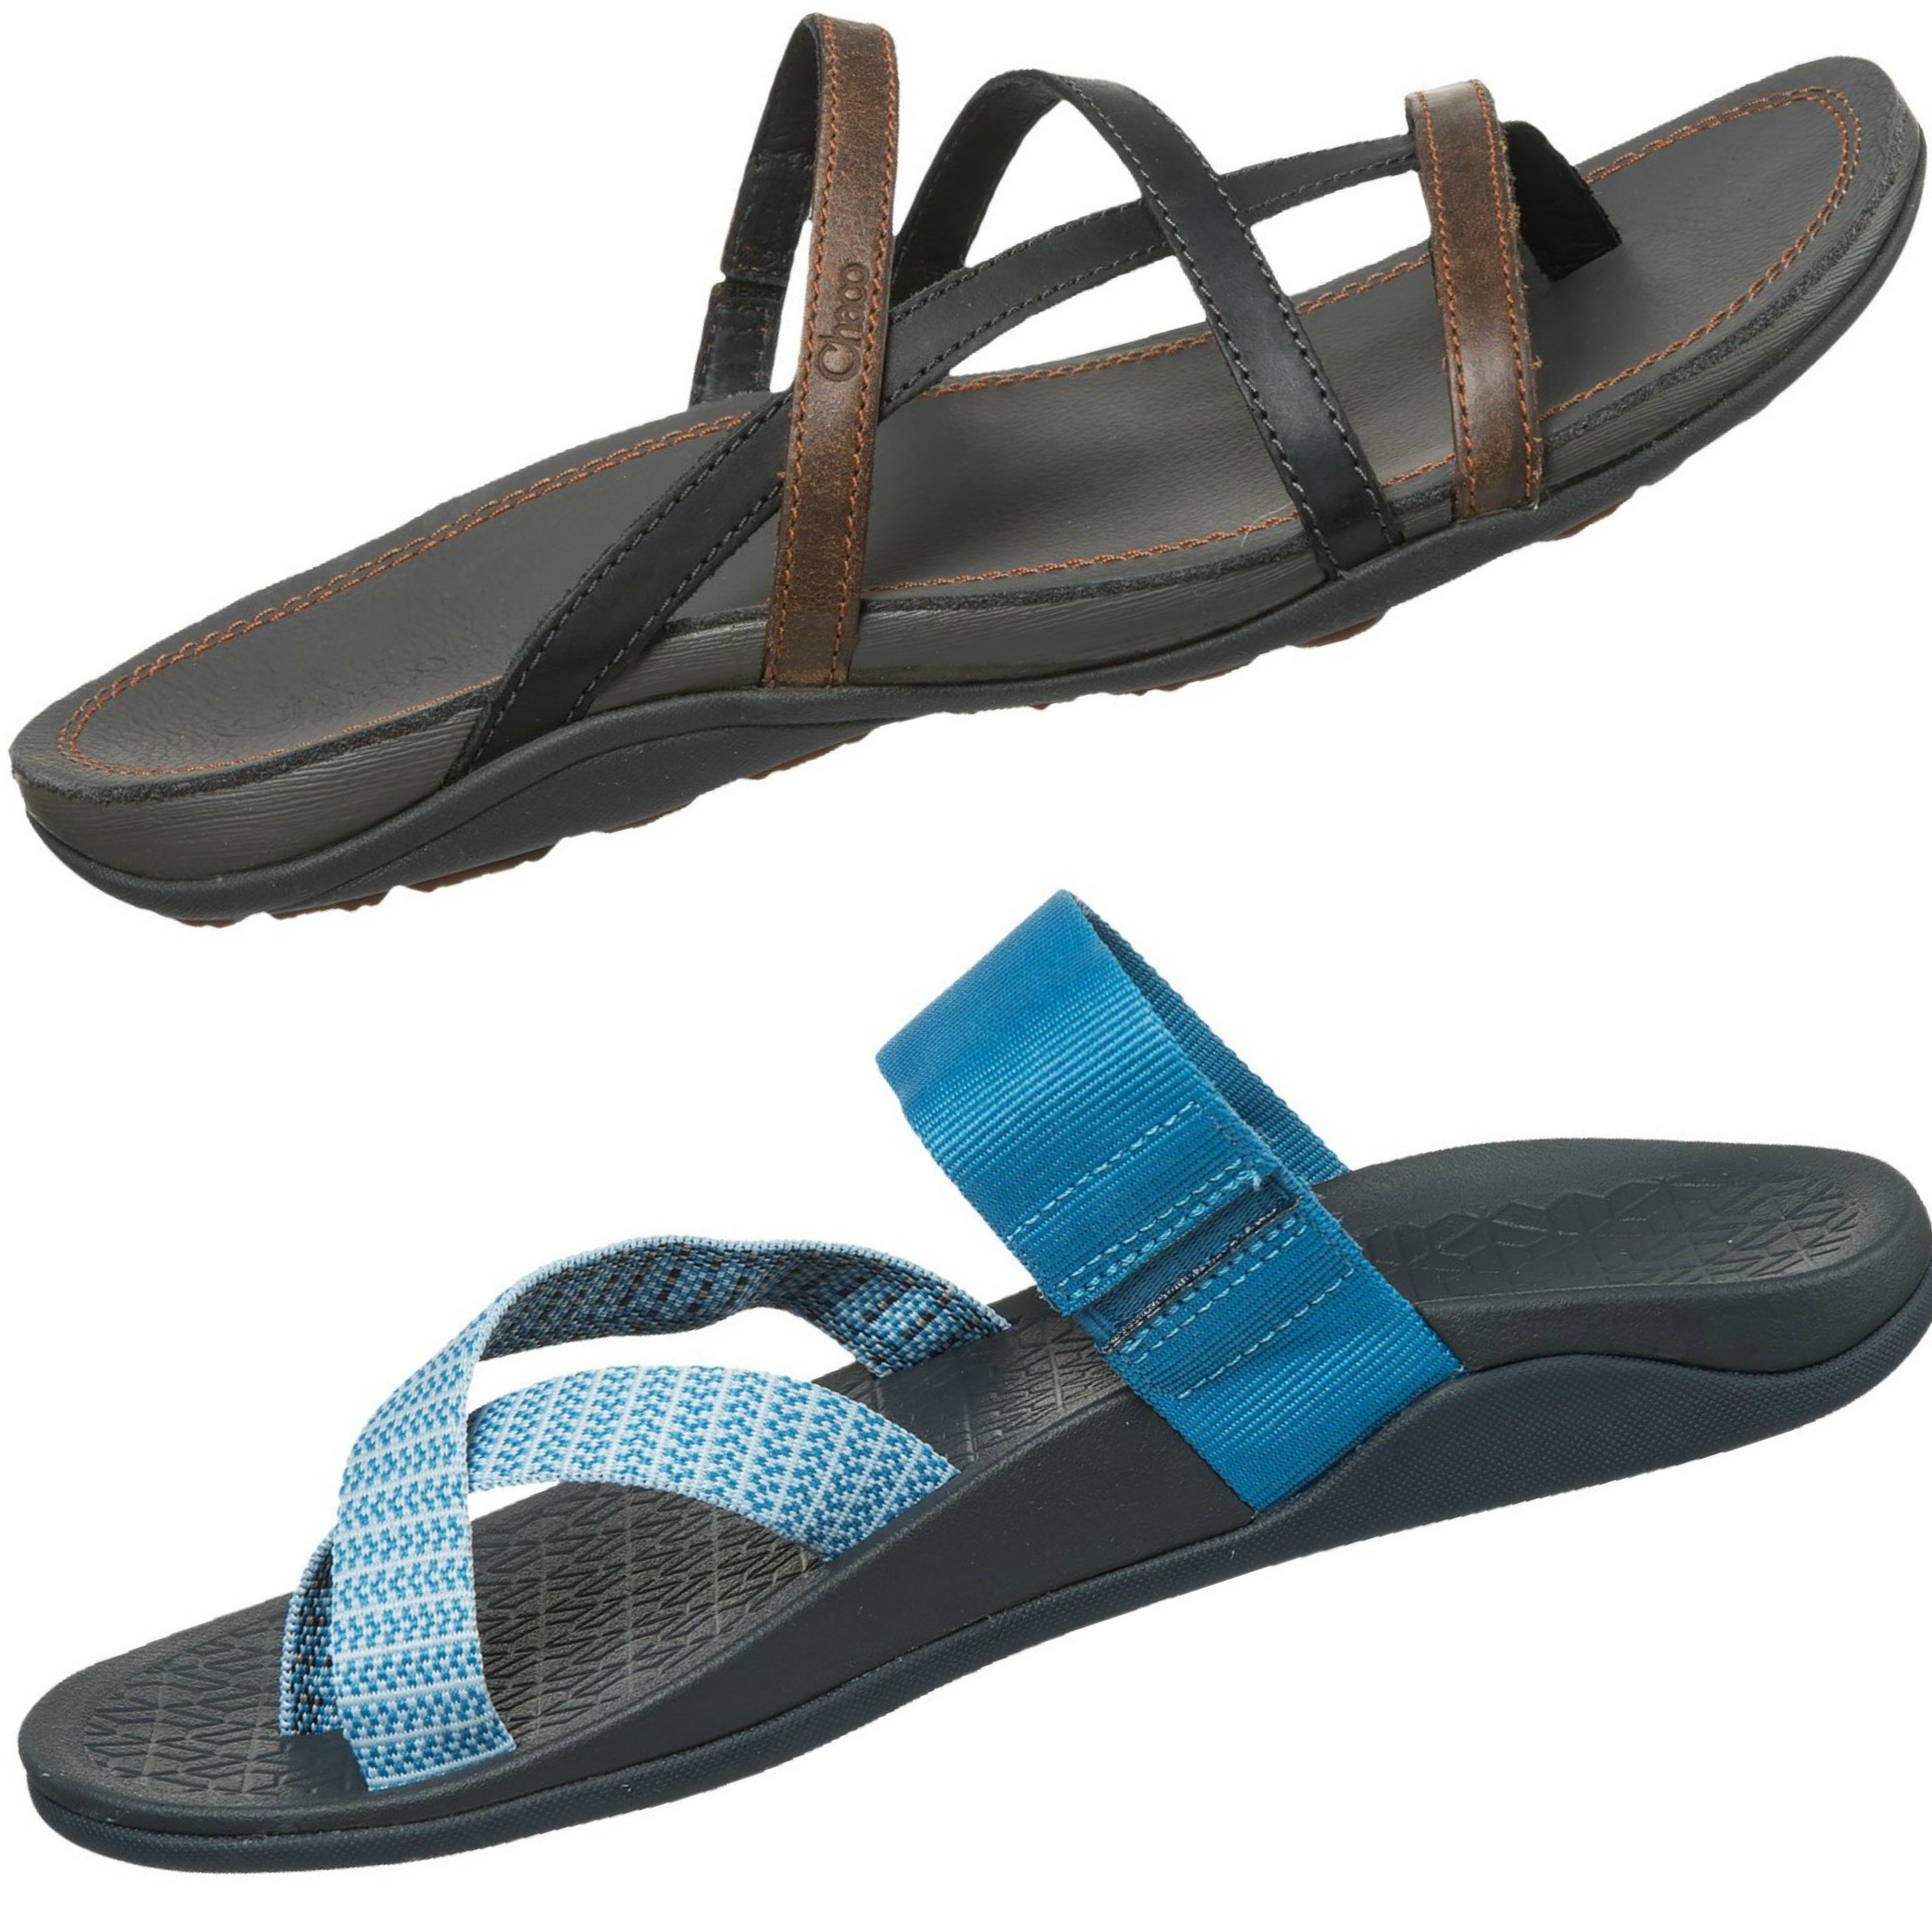 sierra trading post womens chacos